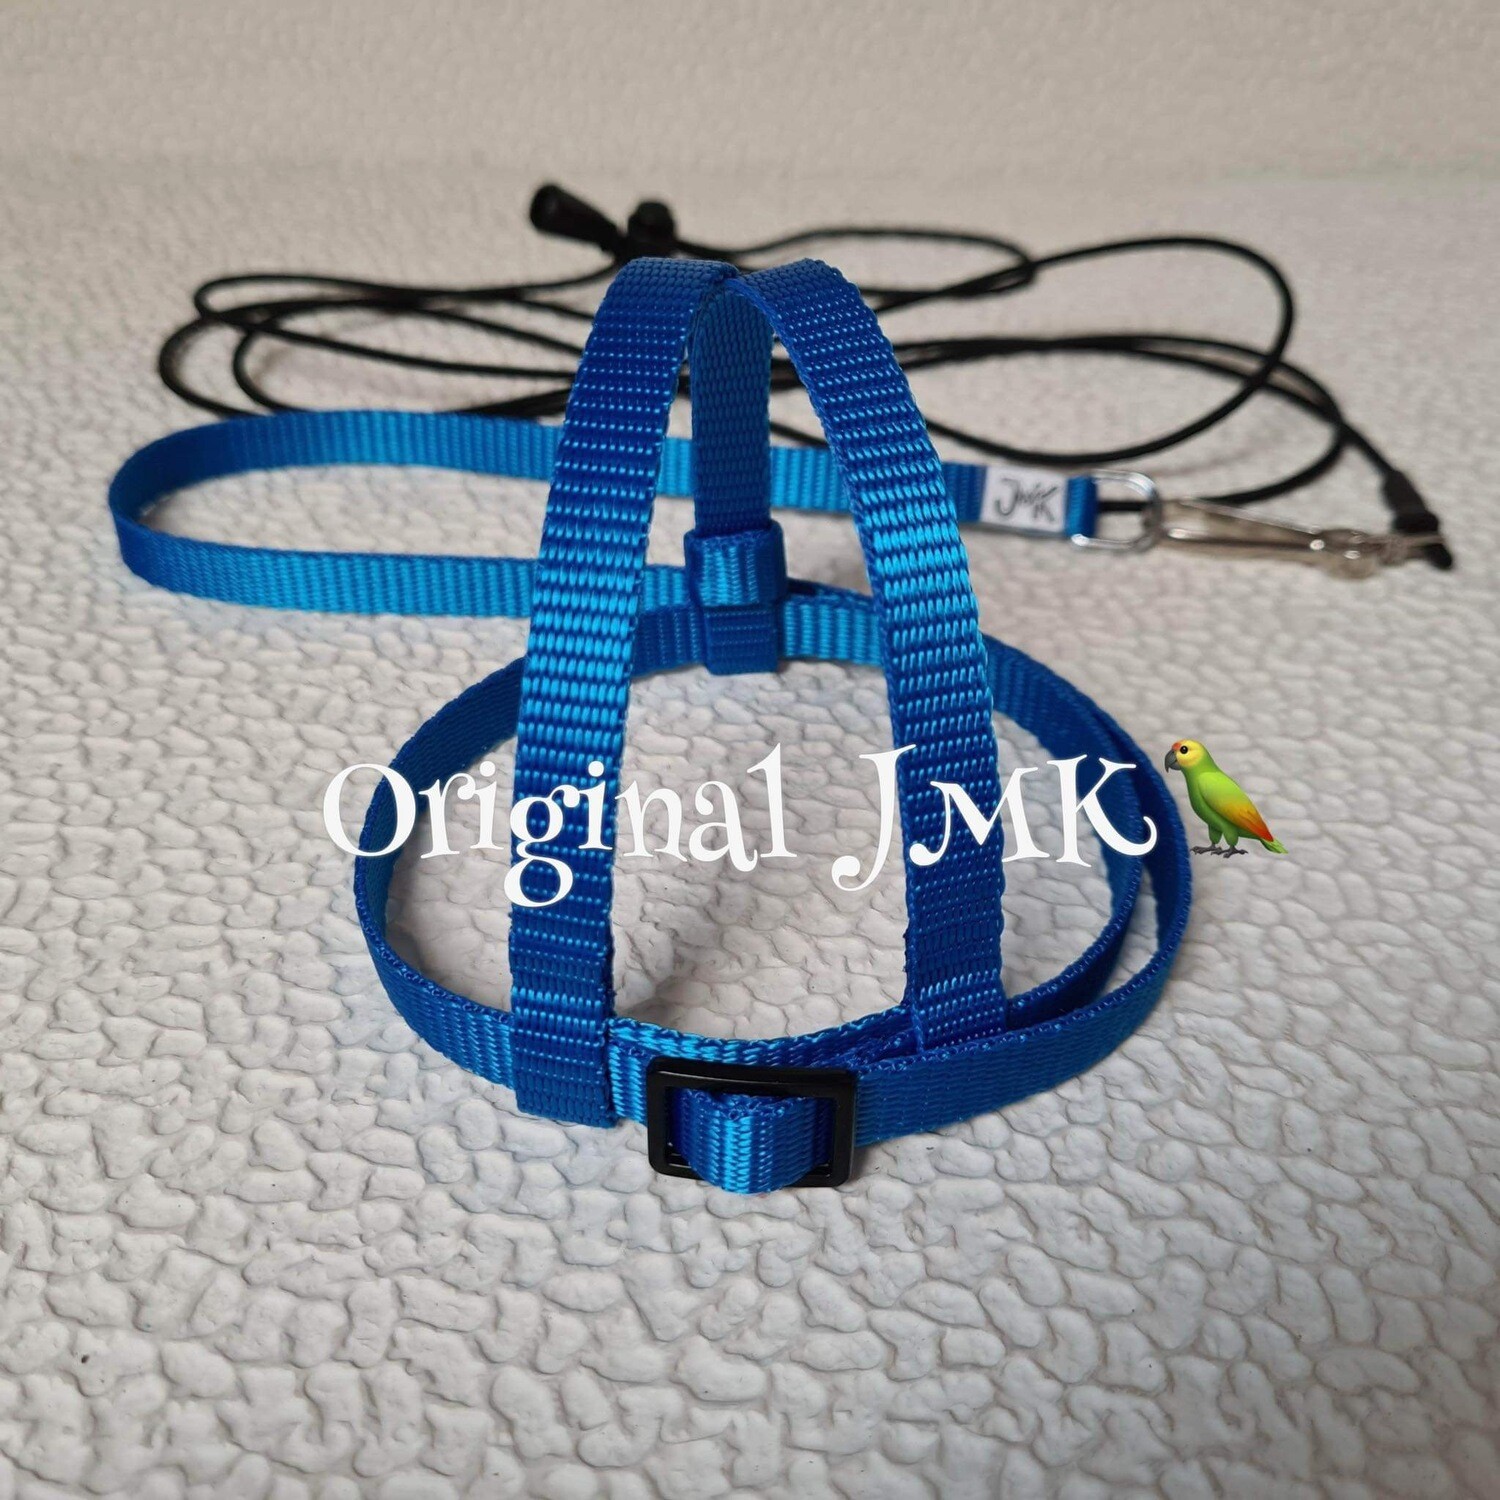 JMK Harness and Leash - Color Blue, Size Extra Large: 1100+ grams: Greenwing Macaws, Hyacinth, Lg. Moluccan